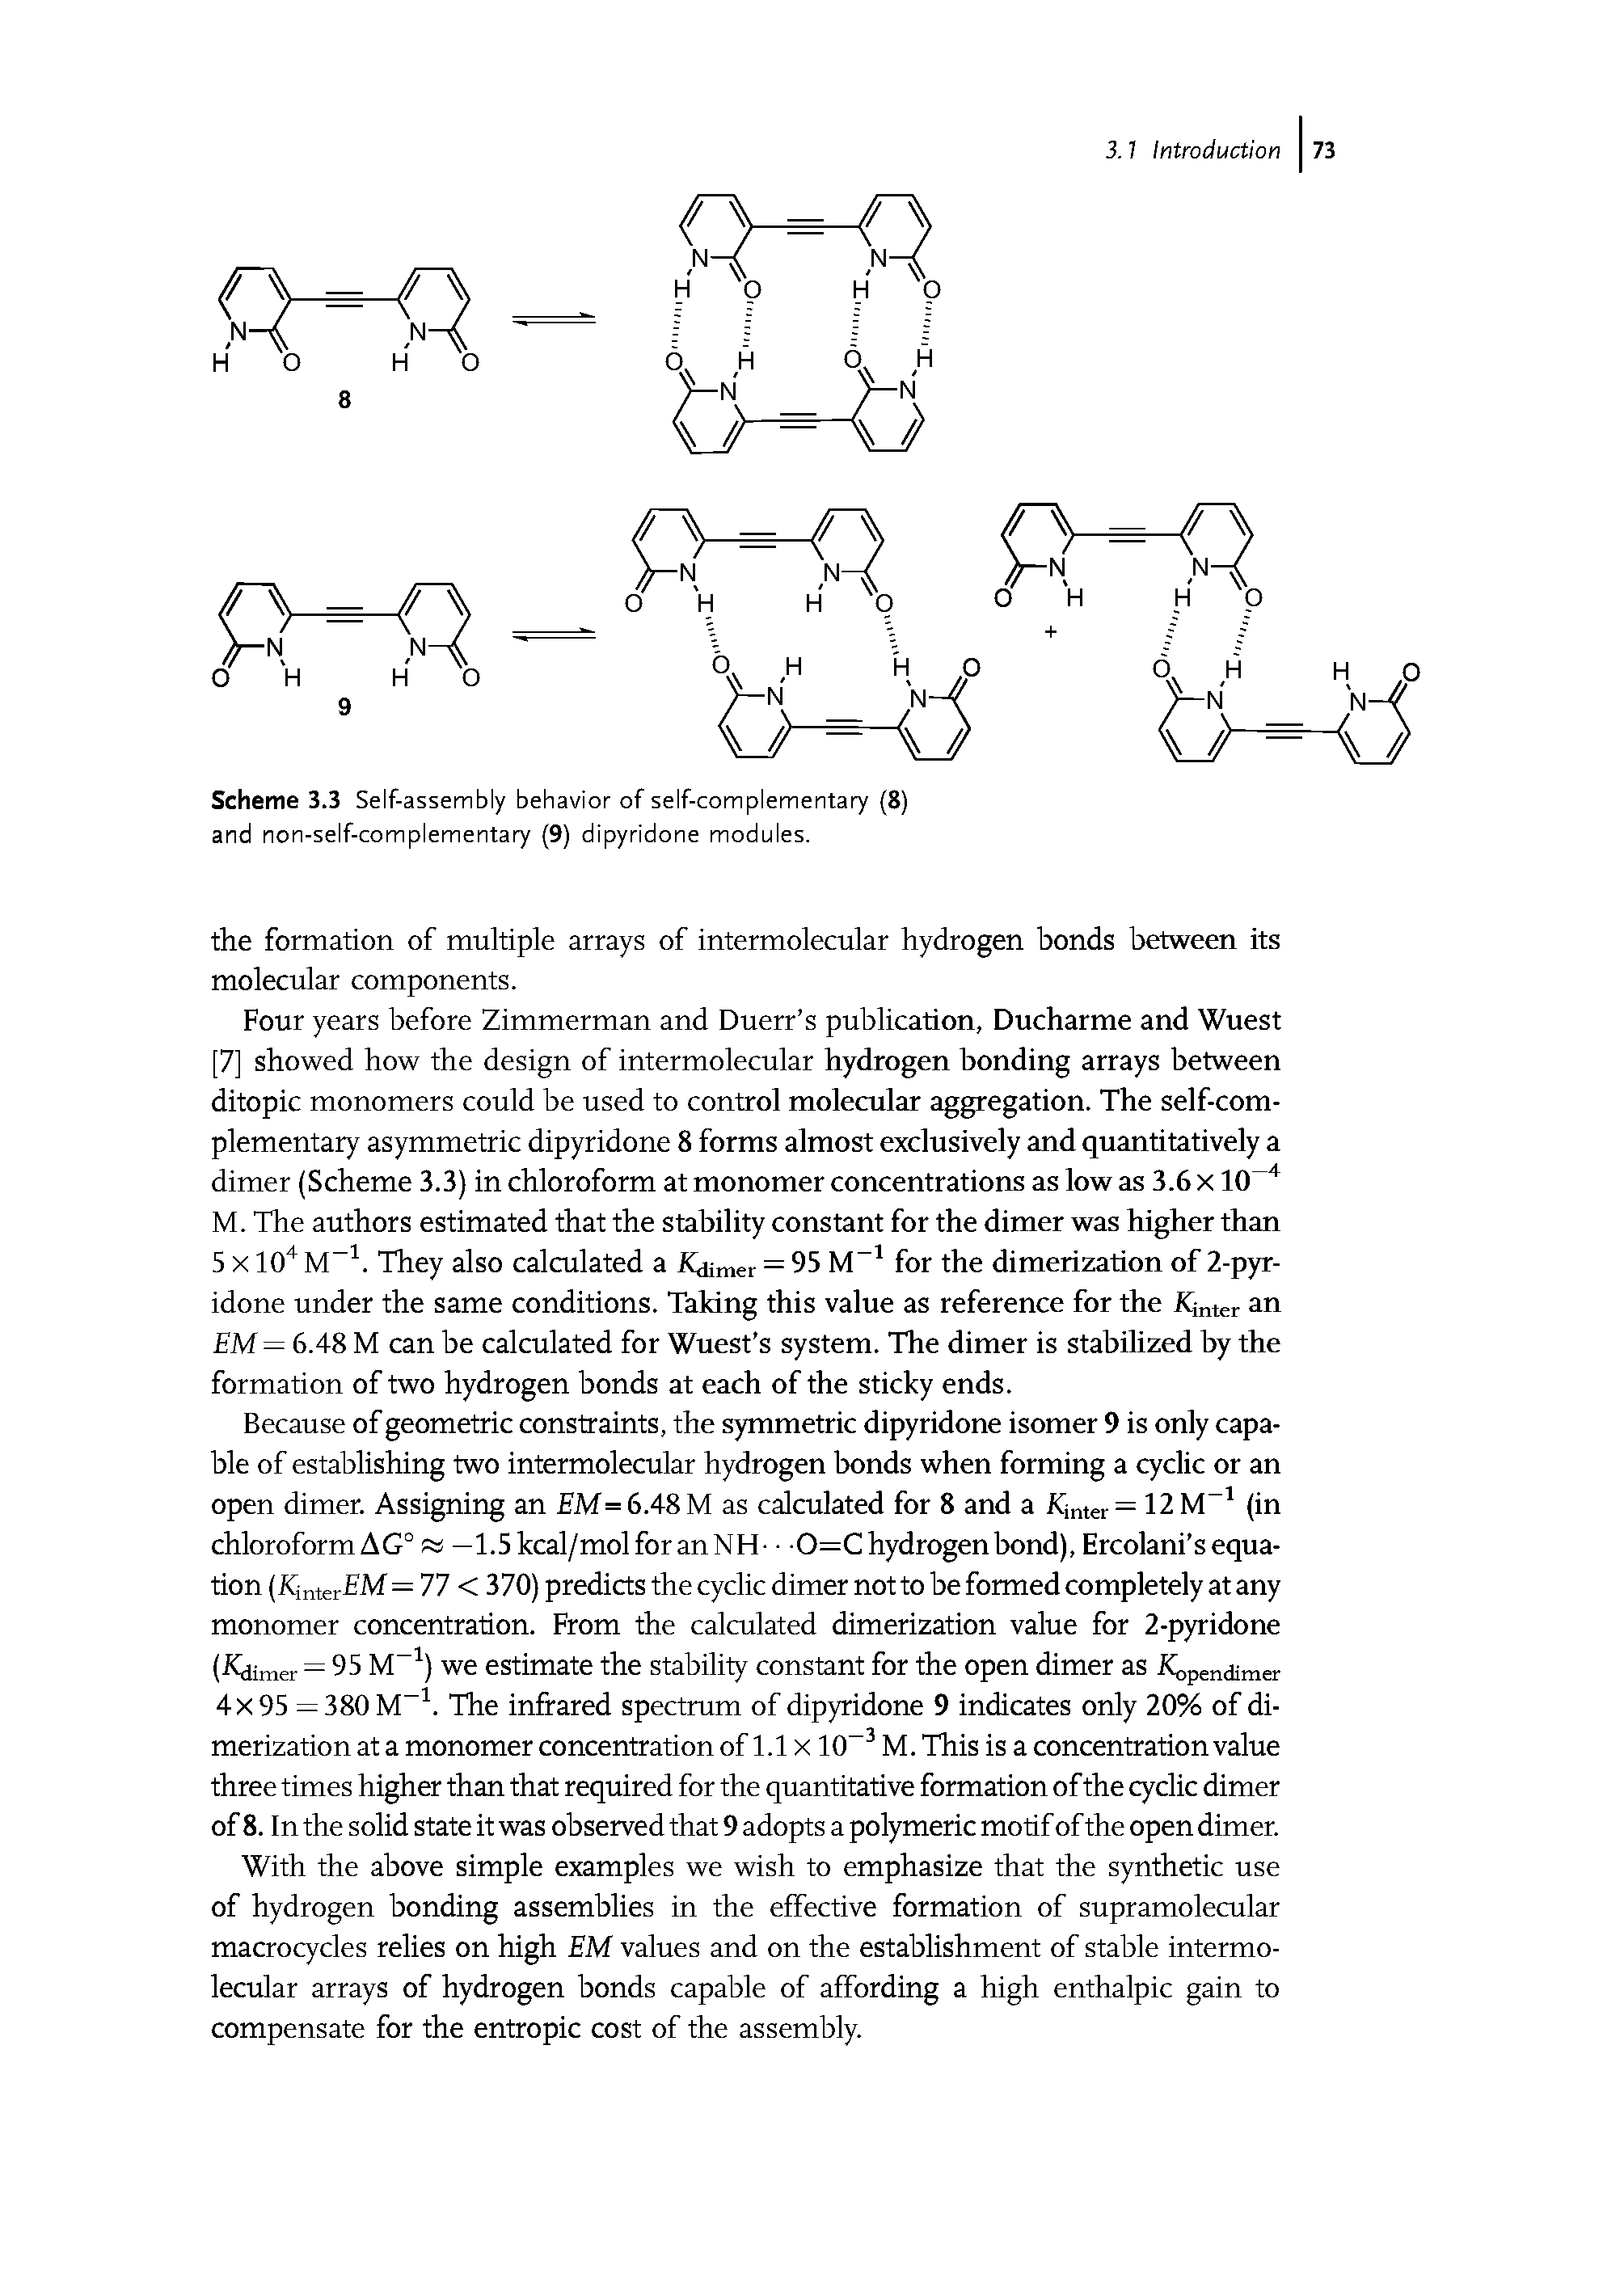 Scheme 3.3 Self-assembly behavior of self-complementary (8) and non-self-complementary (9) dipyridone modules.